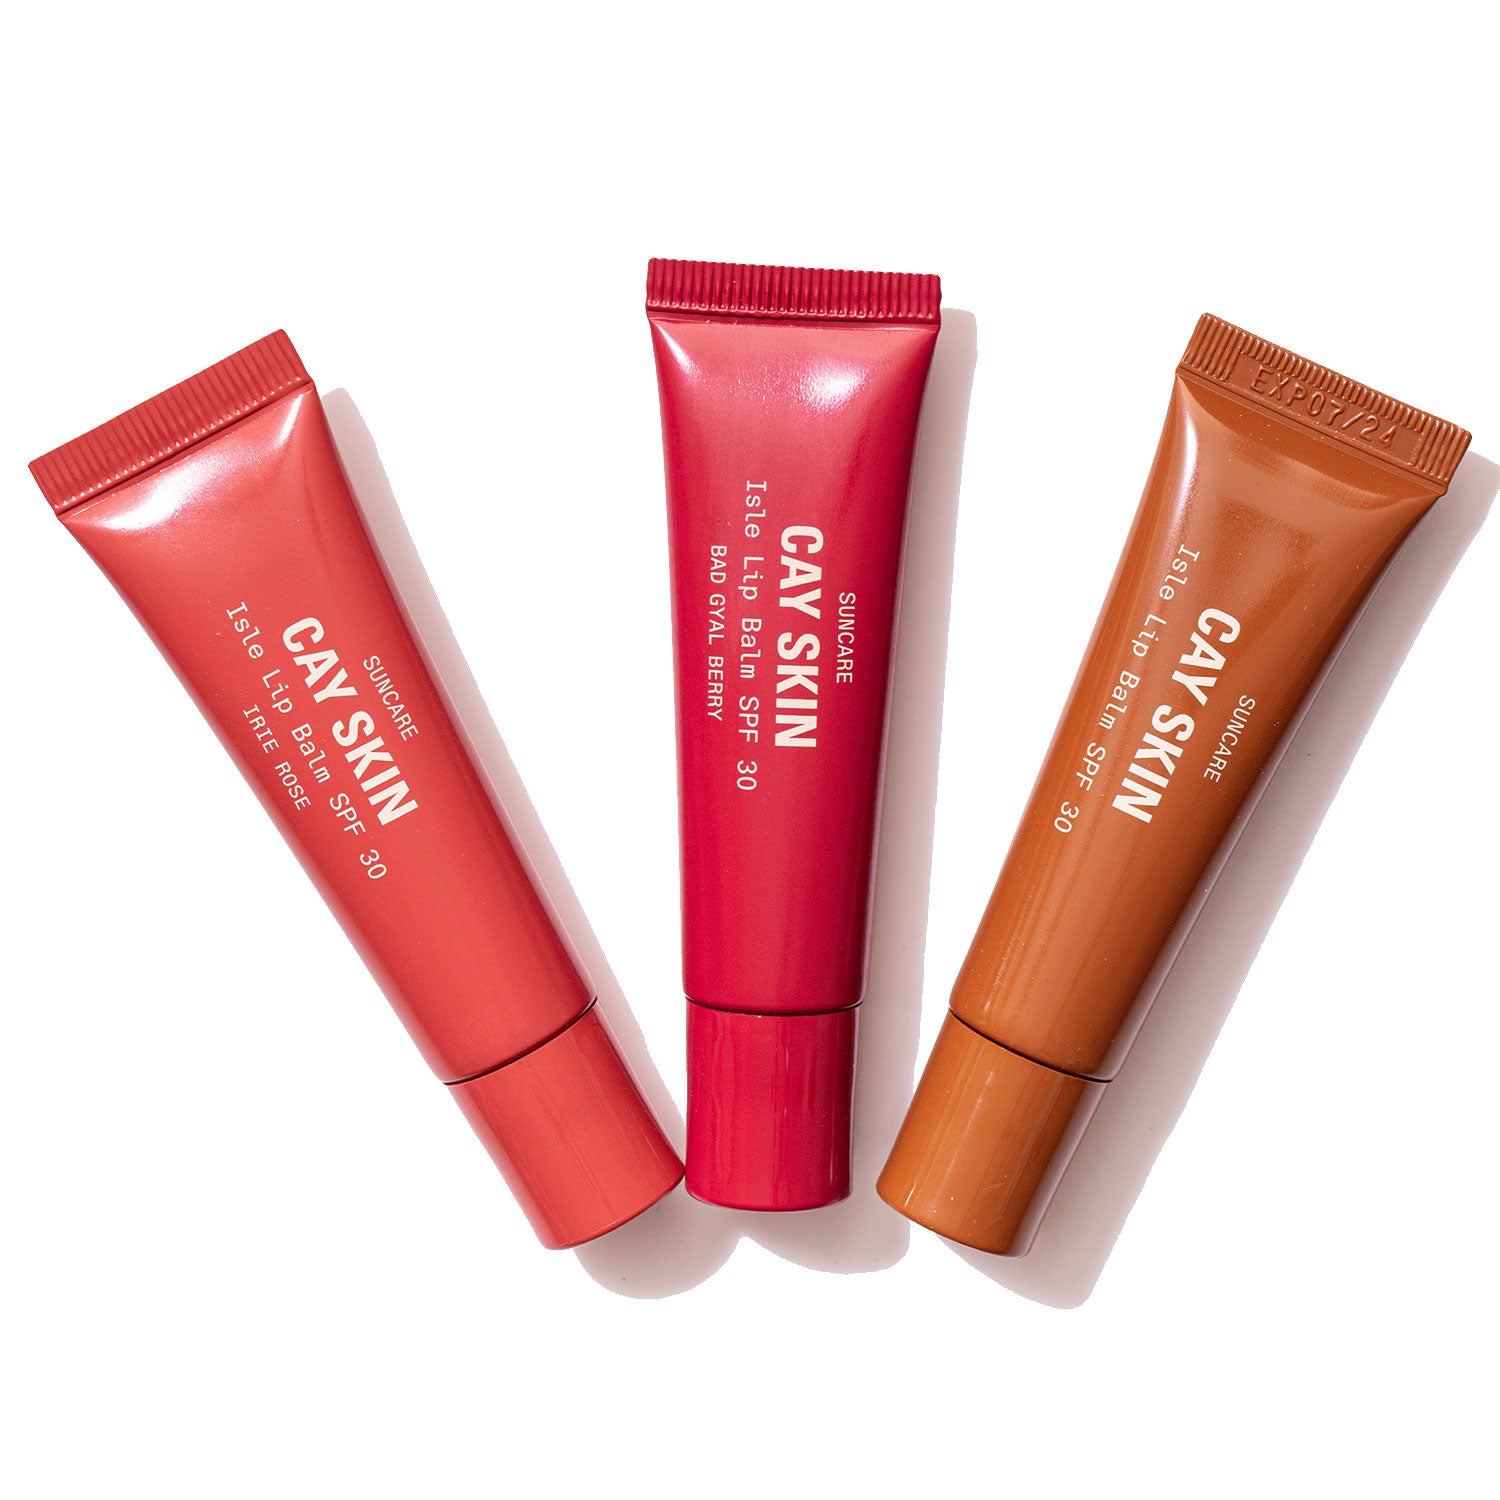 Kissable Lips Trio SPF 30 with Sea Moss and Aloe Stem Cells